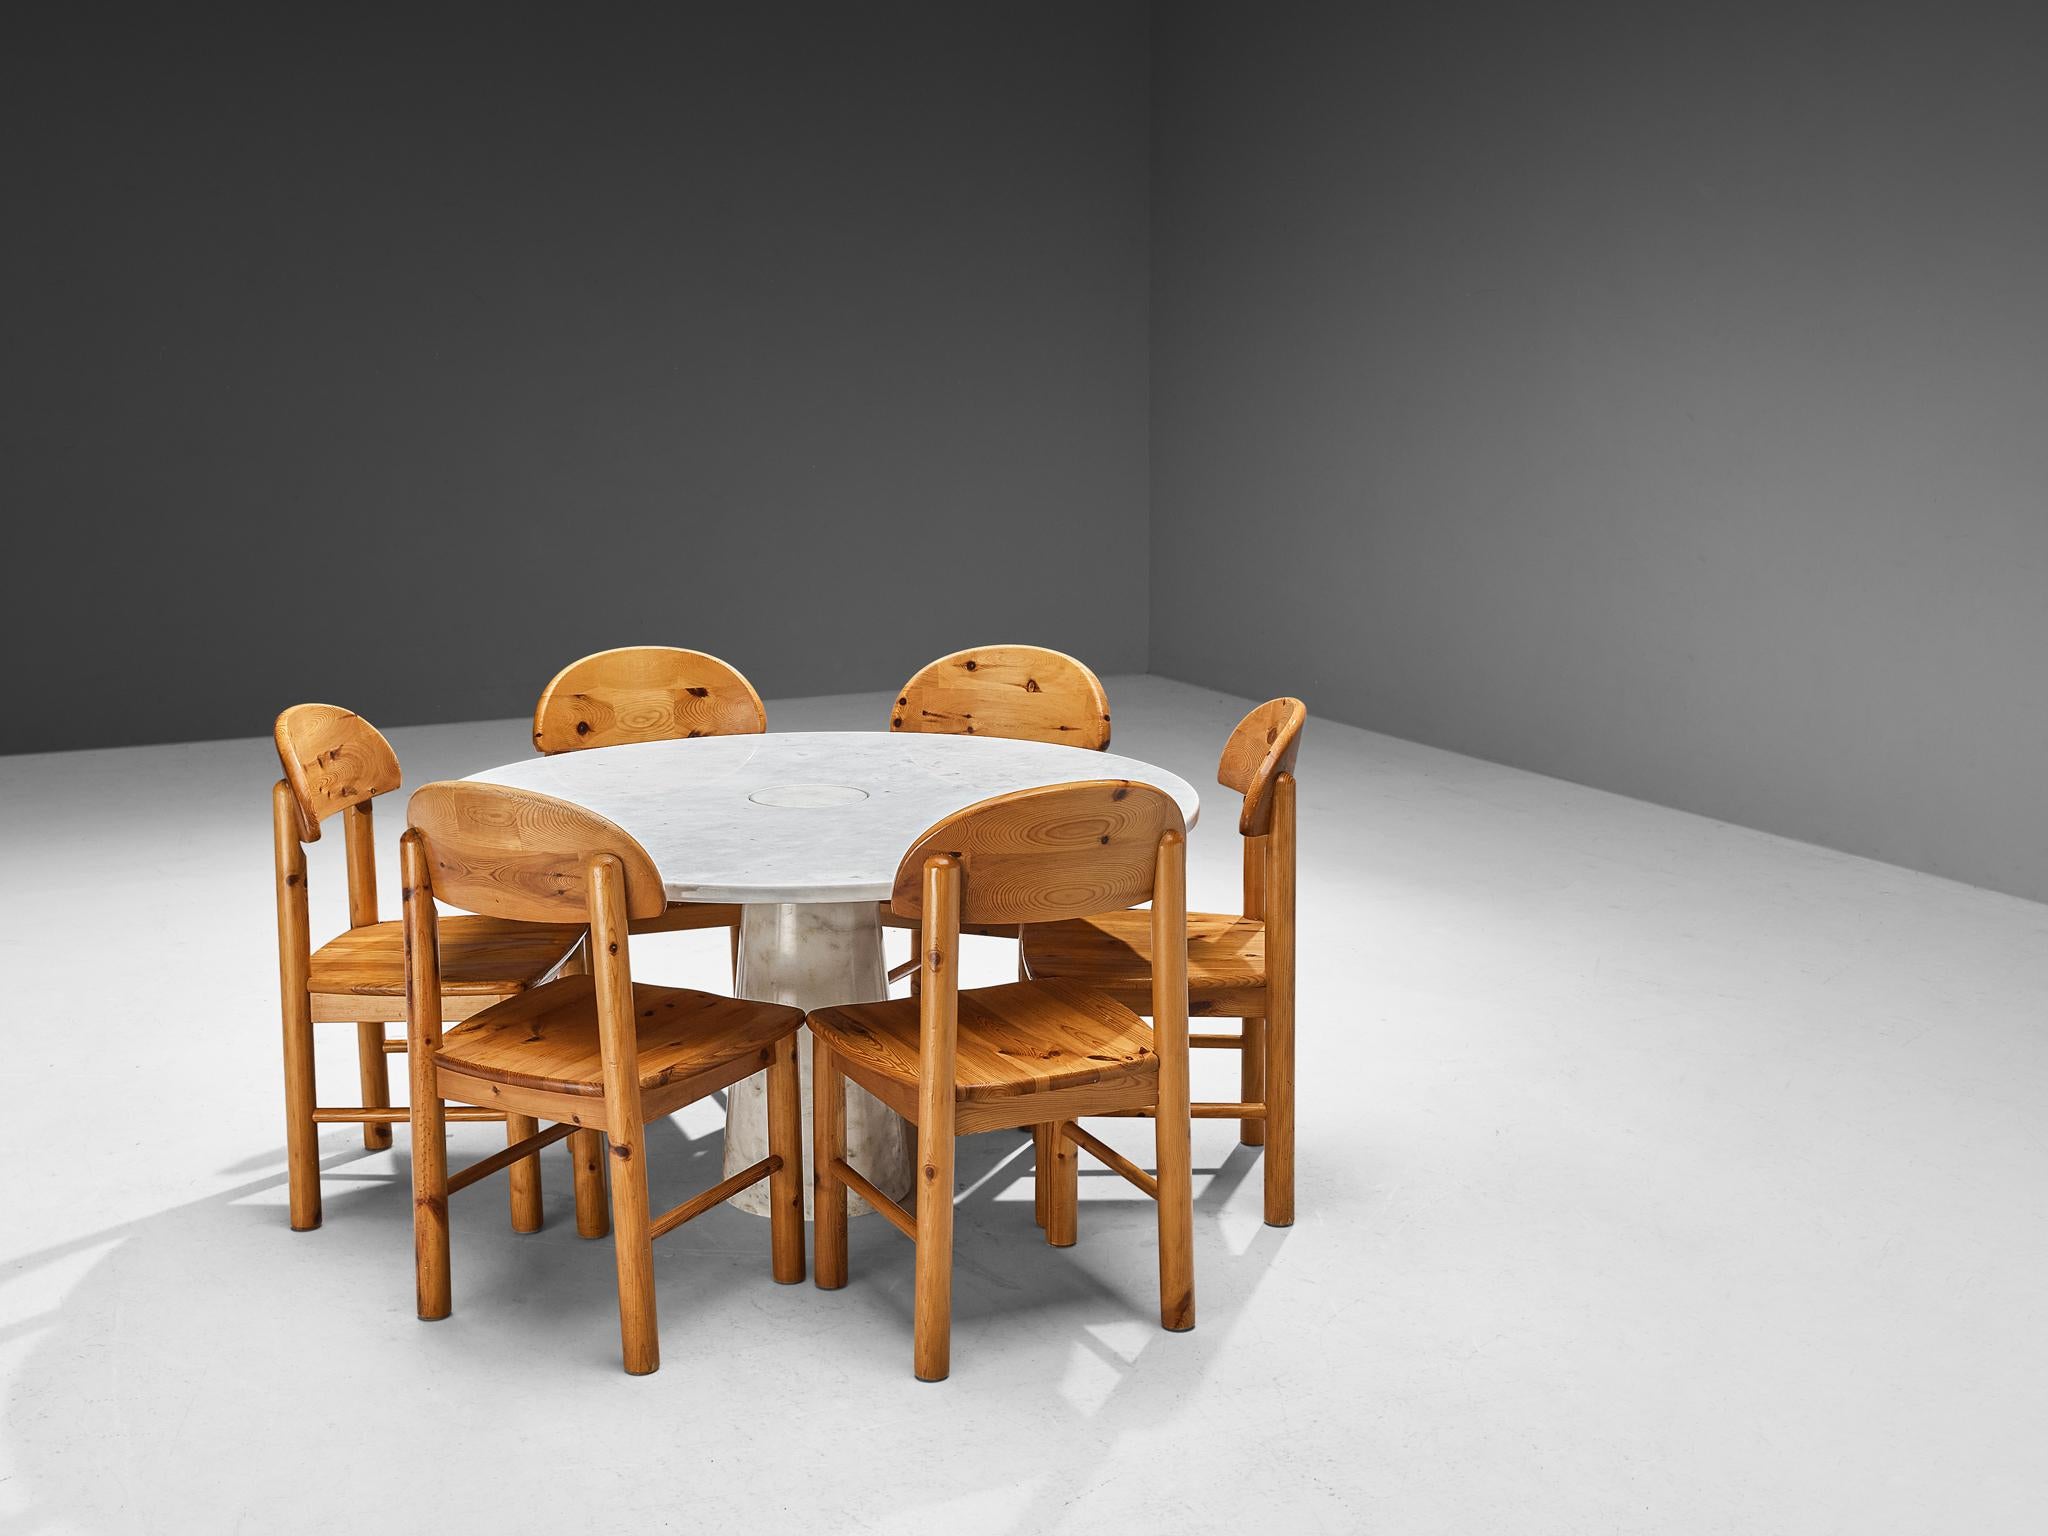 Angelo Mangiarotti for Skipper, dining table ‘Eros’, white marble, 1970s, with Rainer Daumiller Set of Six Dining Chairs in Pine

This sculptural table by Angelo Mangiarotti is a skilful example of postmodern design. The table is executed in white